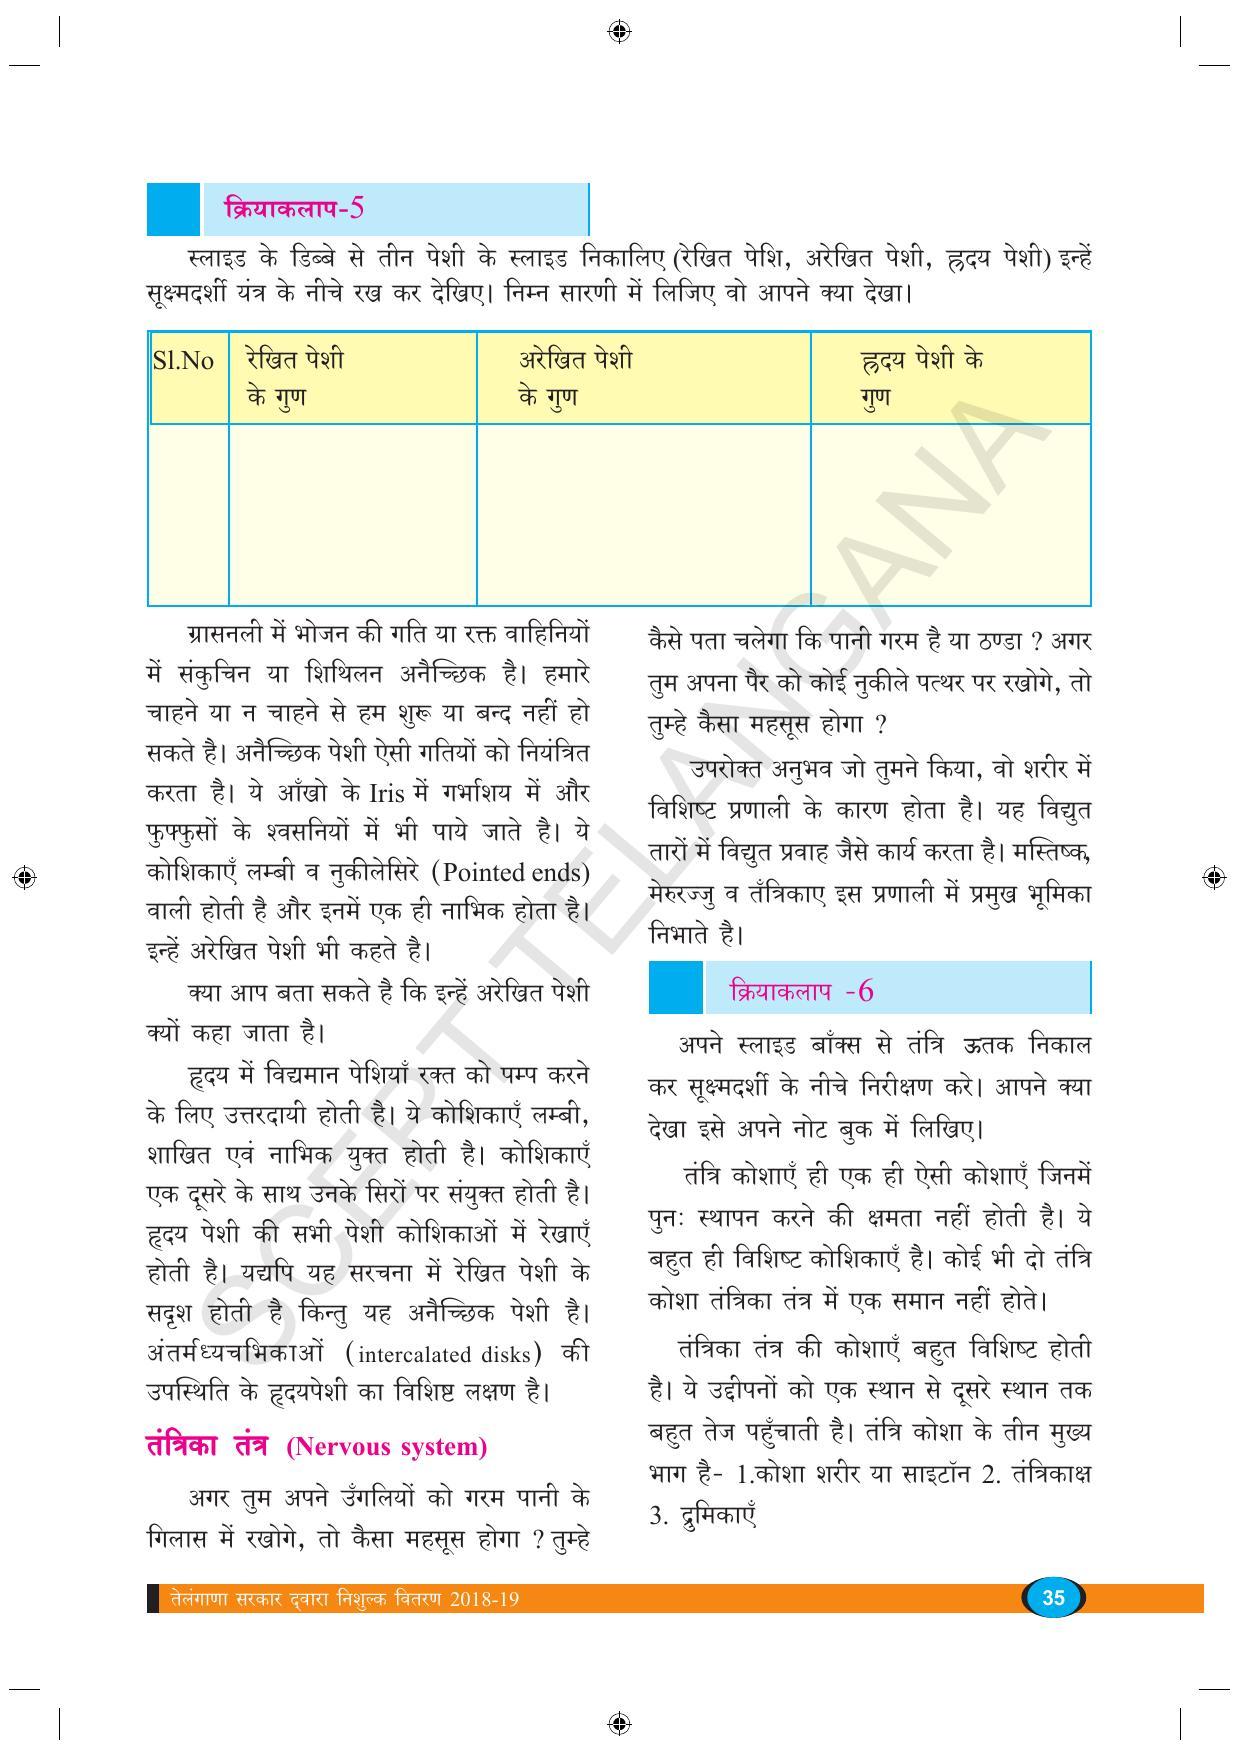 TS SCERT Class 9 Biological Science (Hindi Medium) Text Book - Page 47